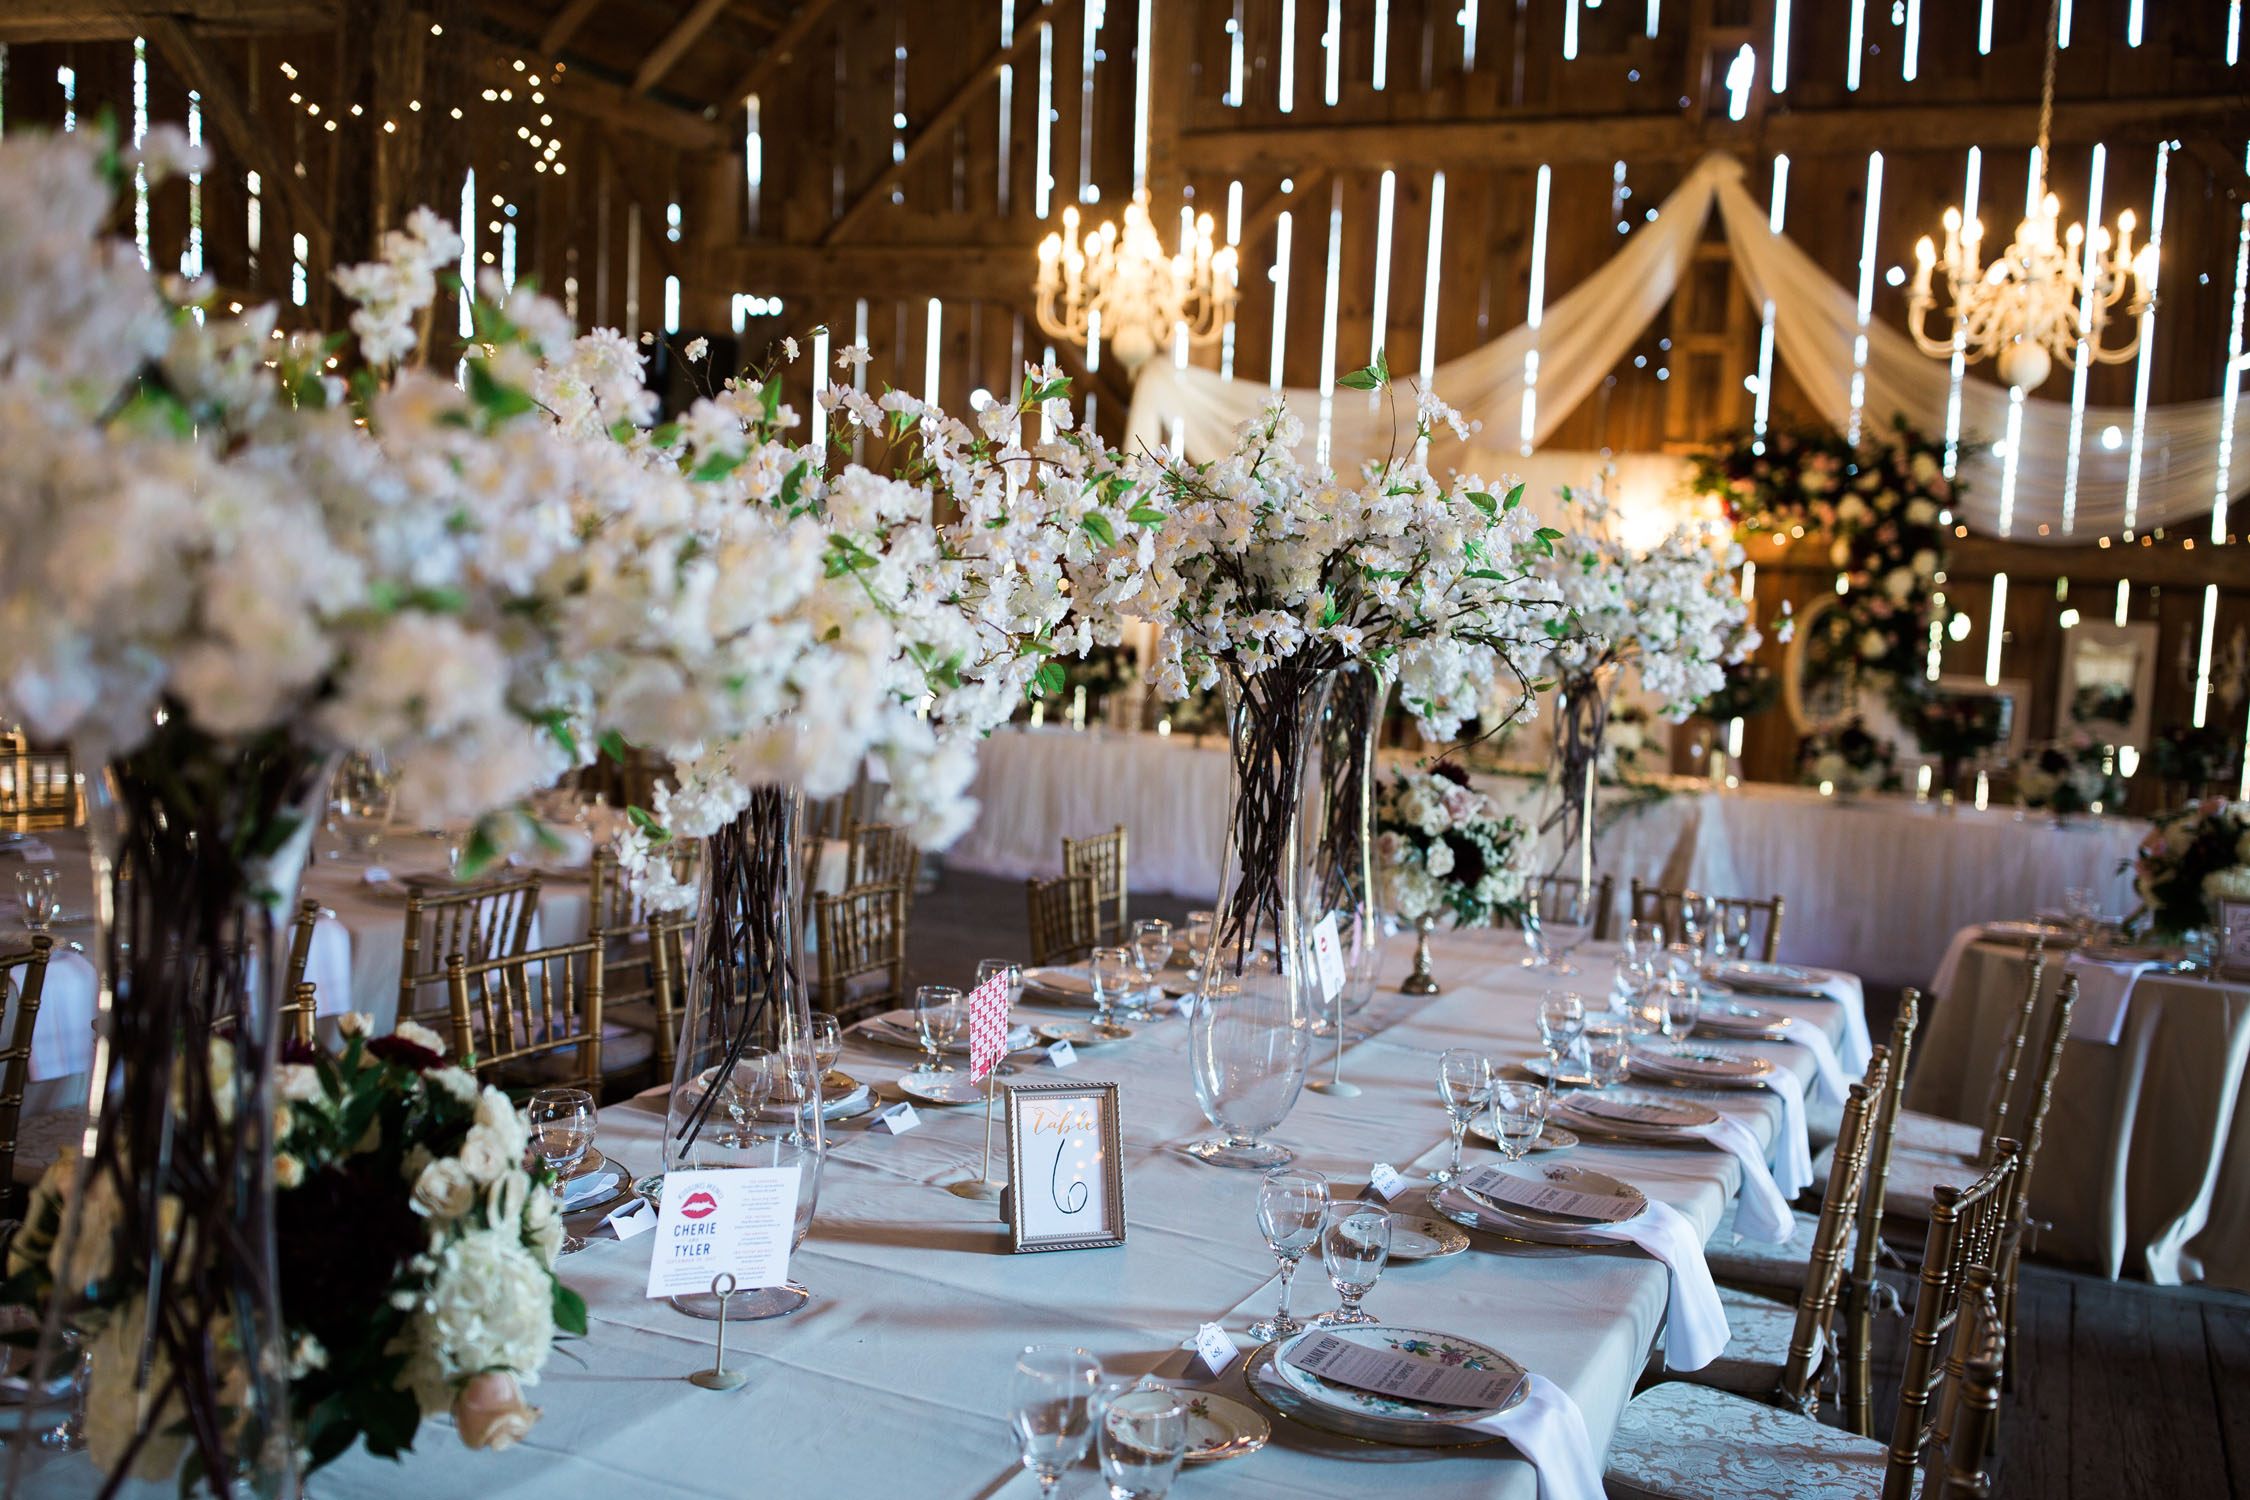 Gorgeous table setting in barn.